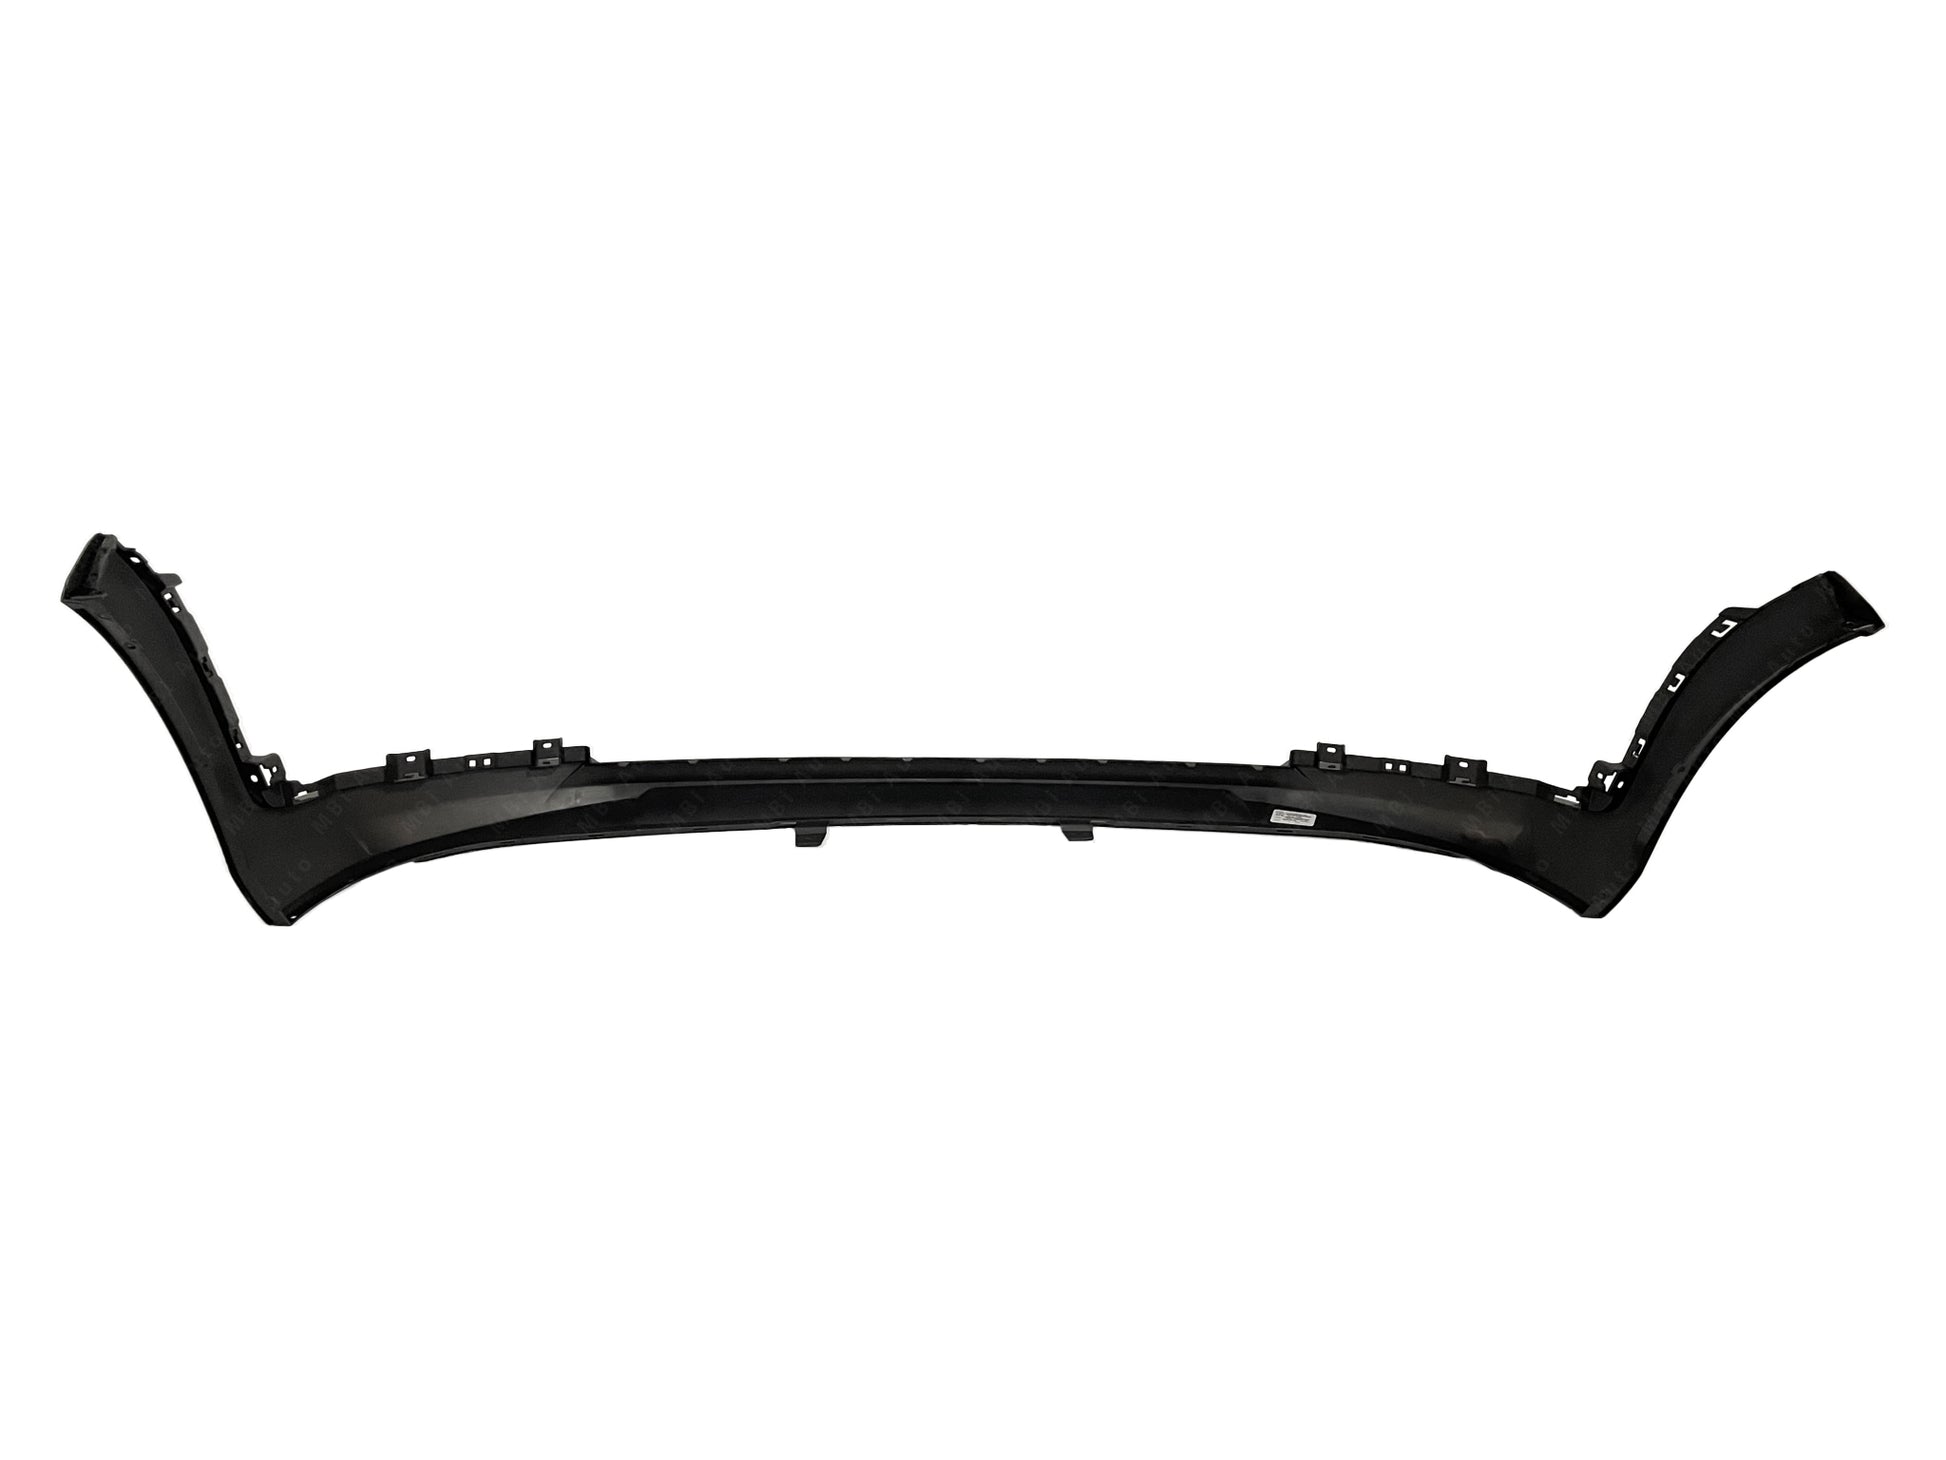 Hyundai Tucson 2019 - 2021 Front Textured Lower Valance 19 - 21 HY1015112 Bumper-King